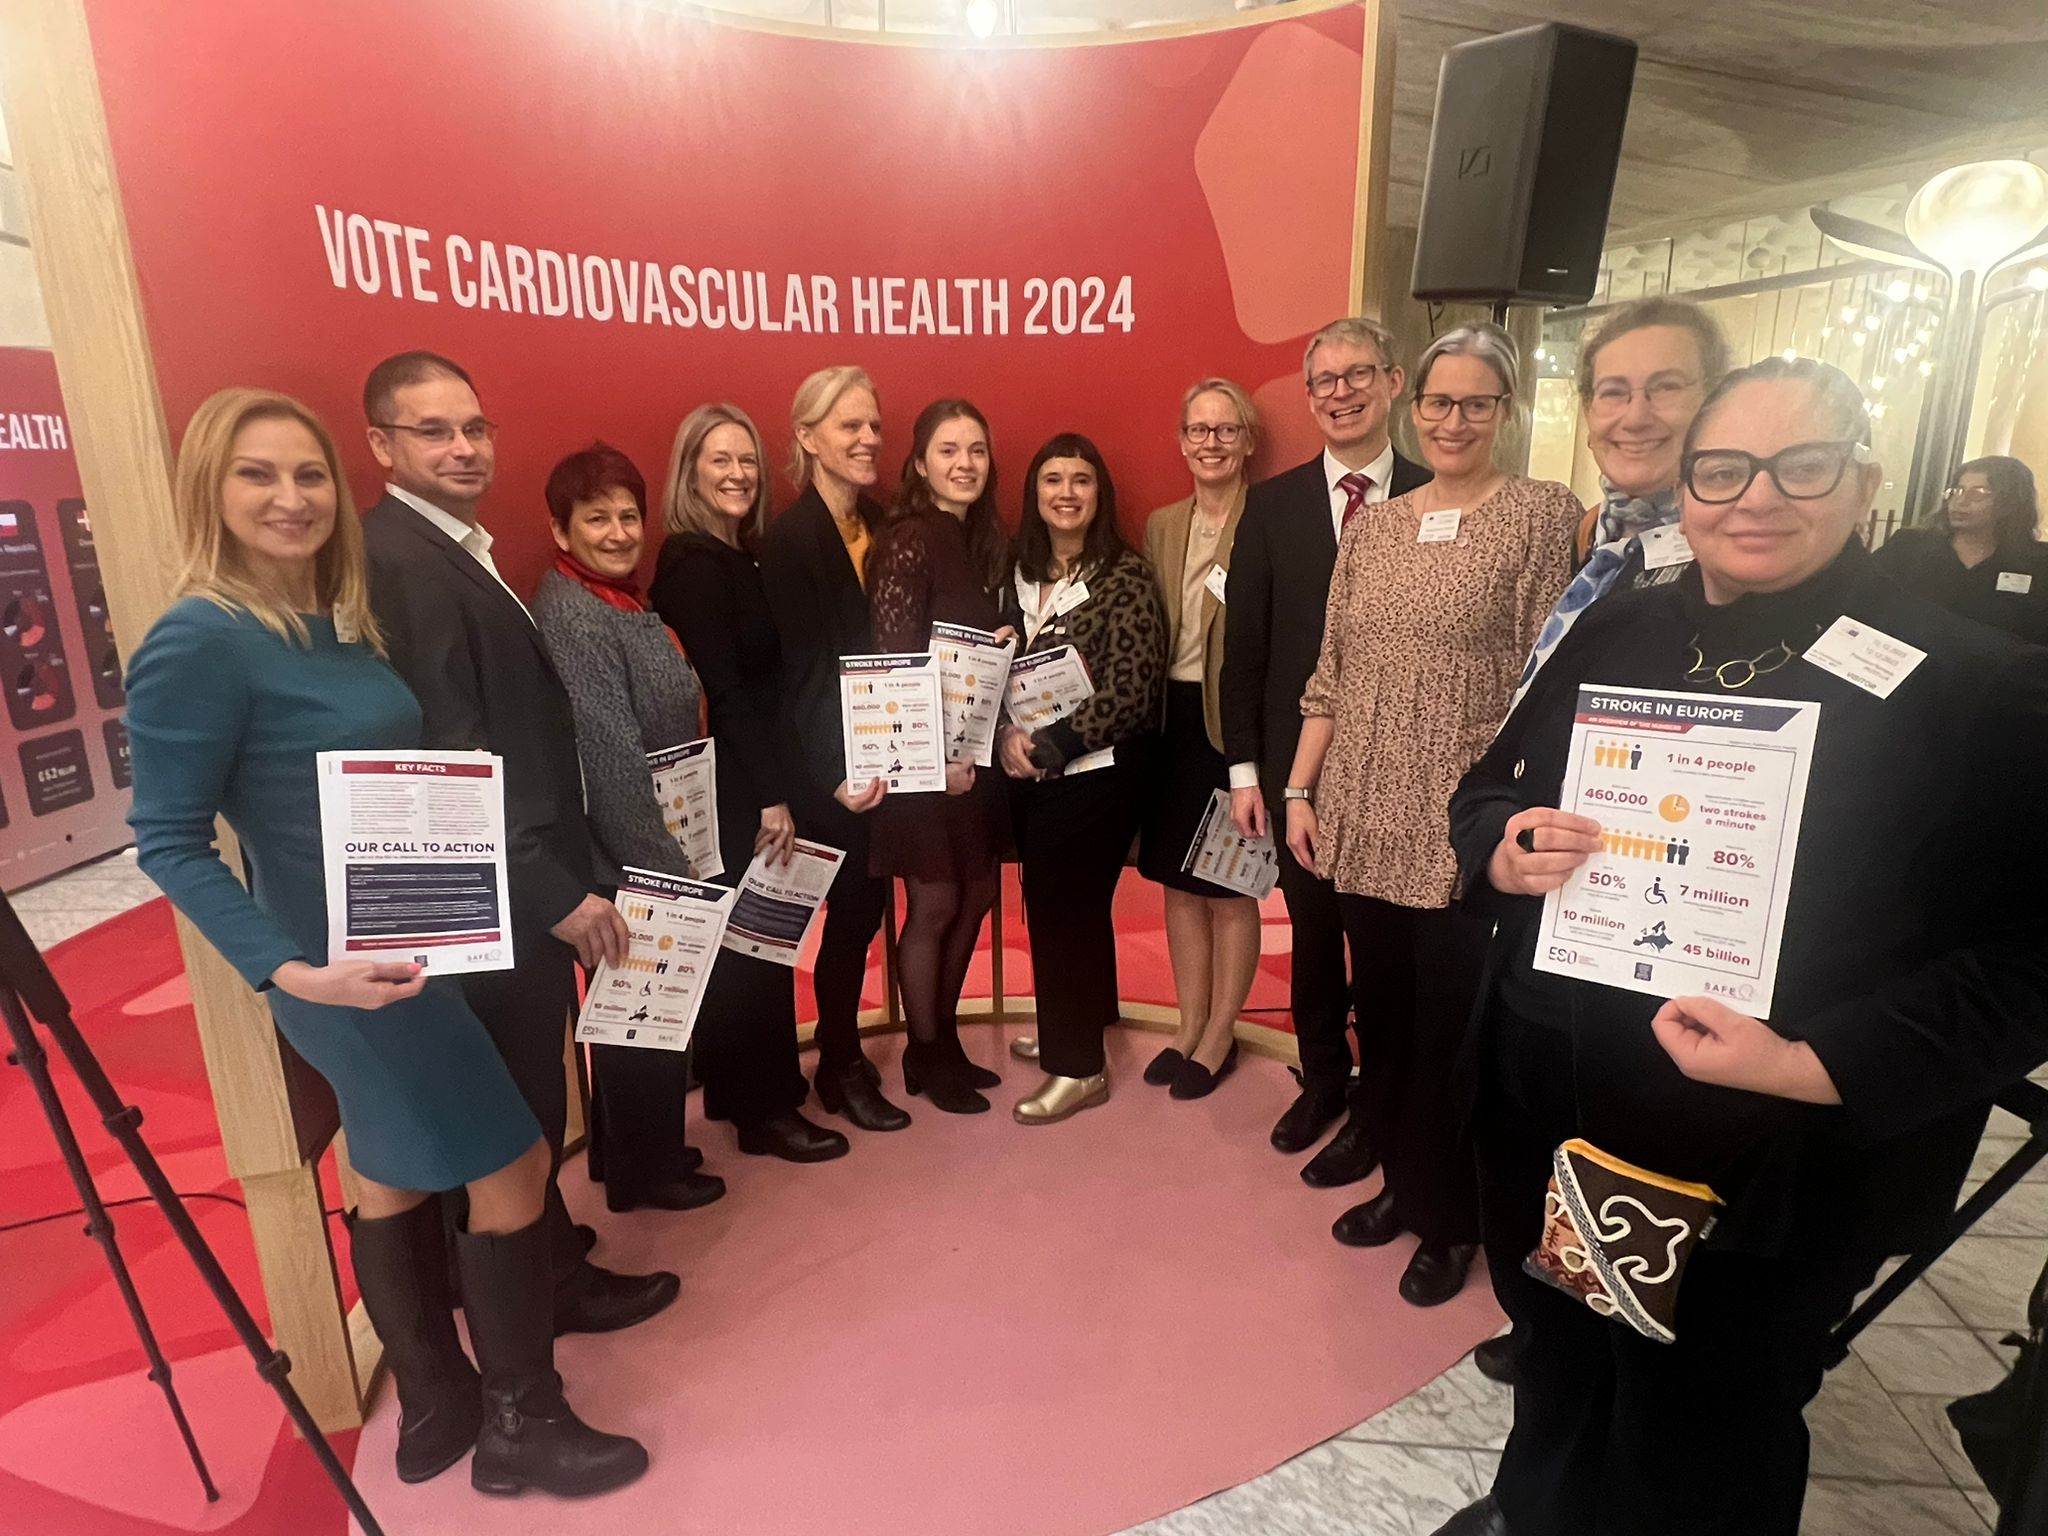 SAFE members calls for EU to implement CVD health plan